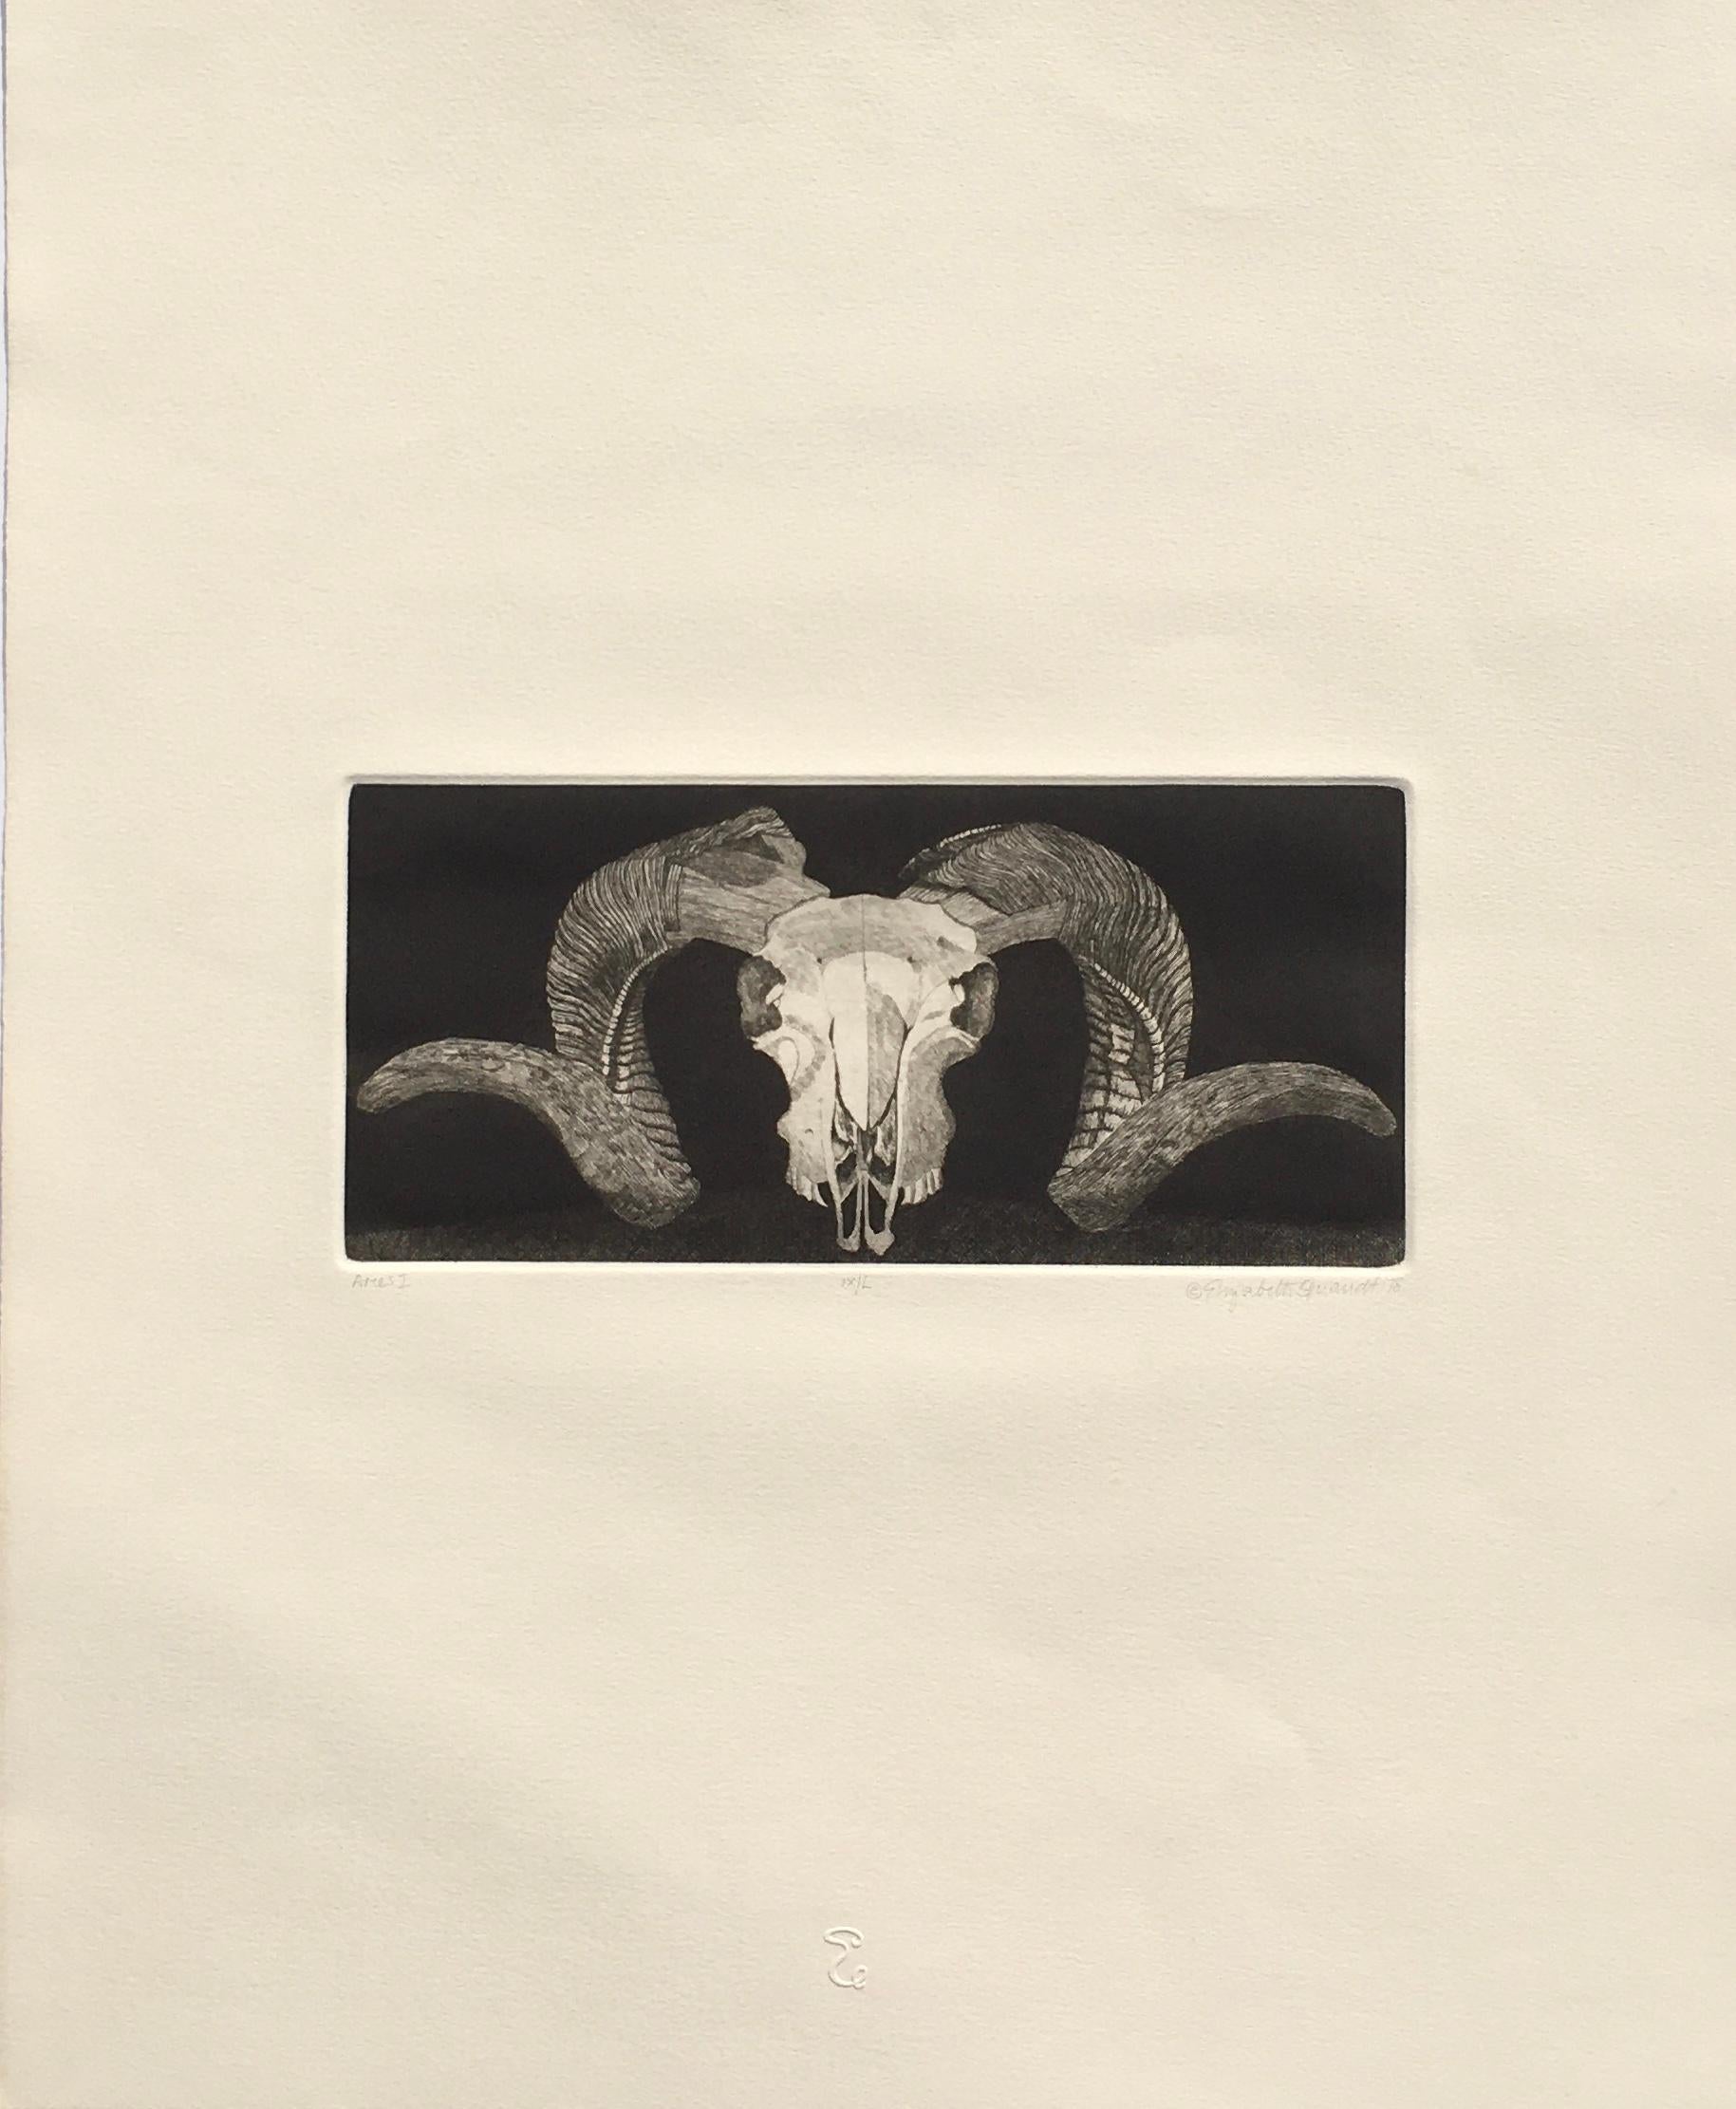 Elizabeth Quandt 'Aries I' Limited Edition, Signed Etching of Ram's Head For Sale 1